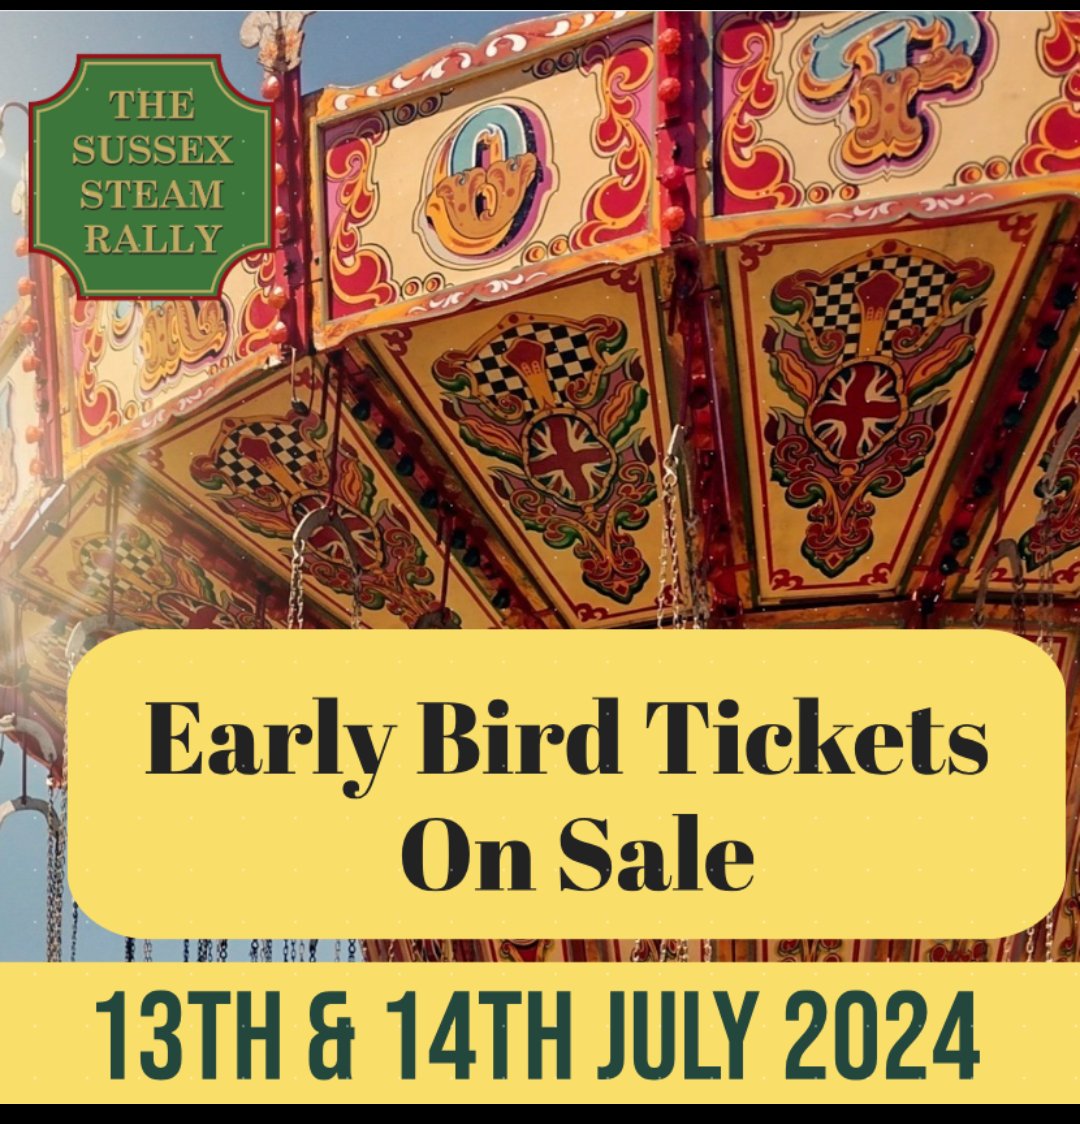 Sussex Steam Shows Ltd is excited to announce the 2024 Sussex Steam Rally on the 13th & 14th July. Once again the rally will take place at Parham House, West Sussex. Early Bird Tickets are now on sale Exhibitor, Trader and Catering enquires are open More info in our bio